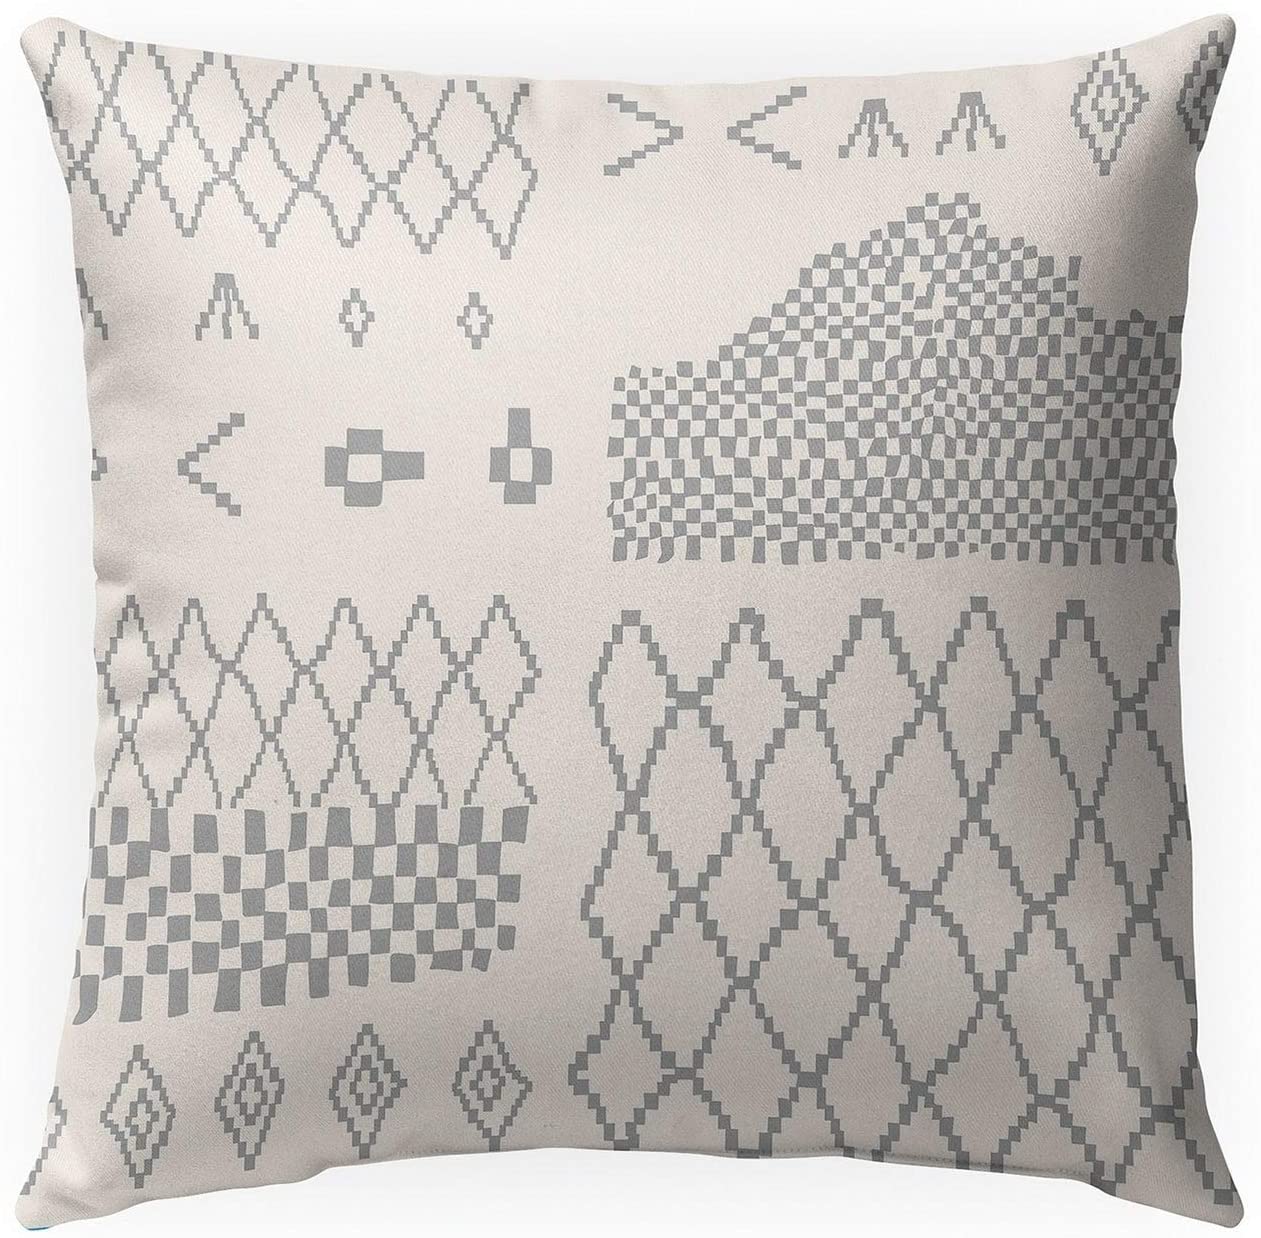 MISC Moroccan Patchwork Grey Indoor|Outdoor Pillow by N/ 18x18 Southwestern Polyester Removable Cover